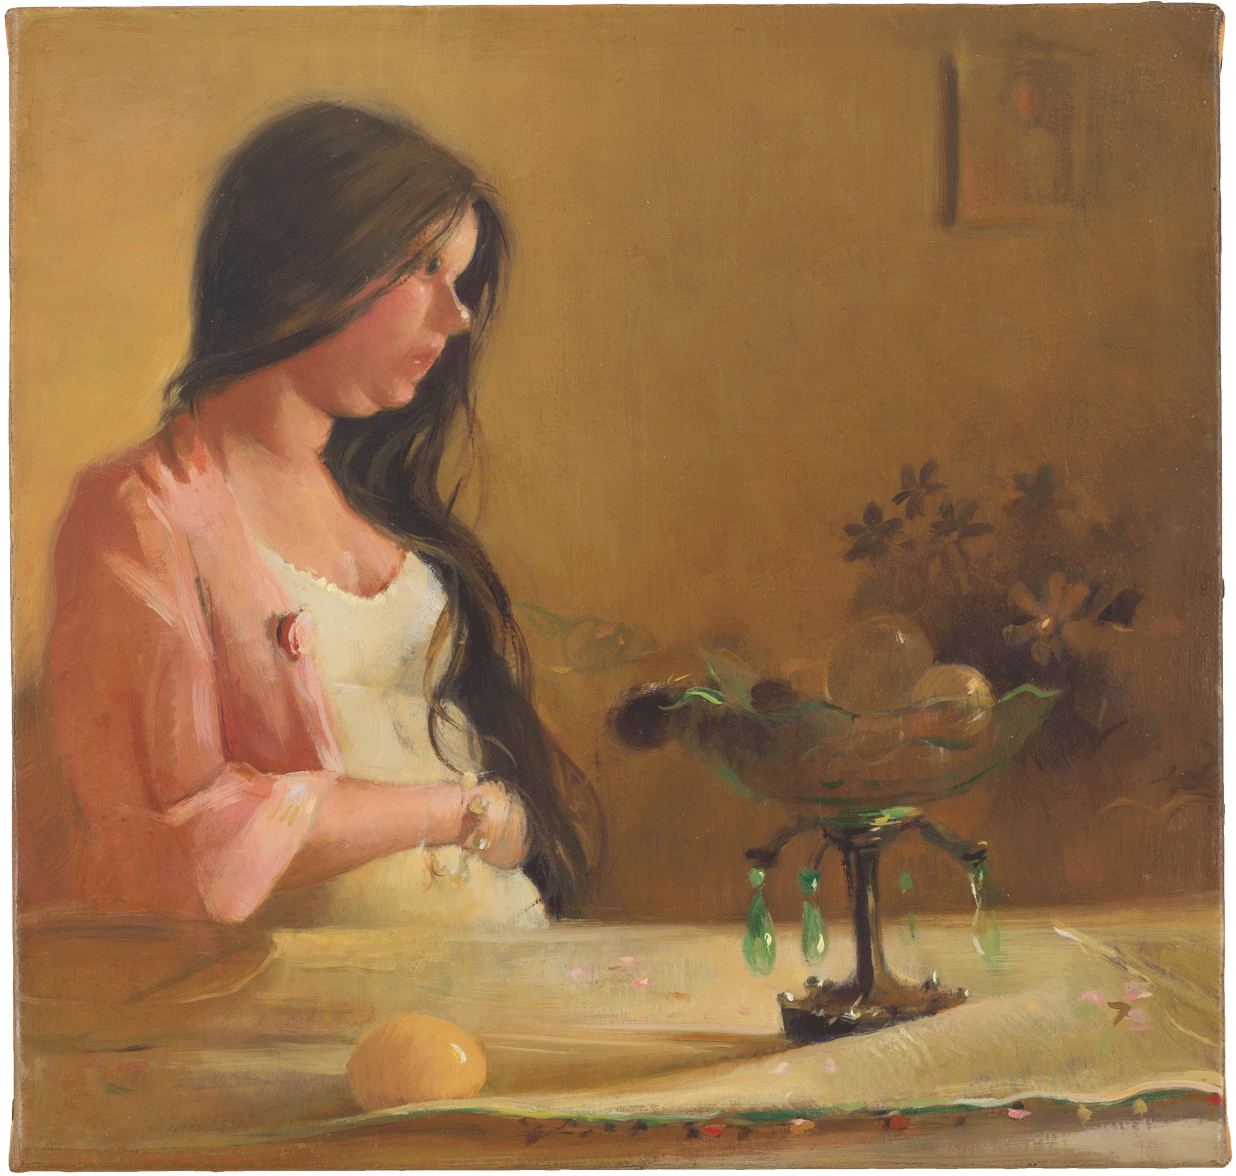 Lisa Yuskavage, Wee Morning, 2004, oil on linen, 10 x 10 3/8 inches (Private Collection, image courtesy of David Zwirner Gallery)